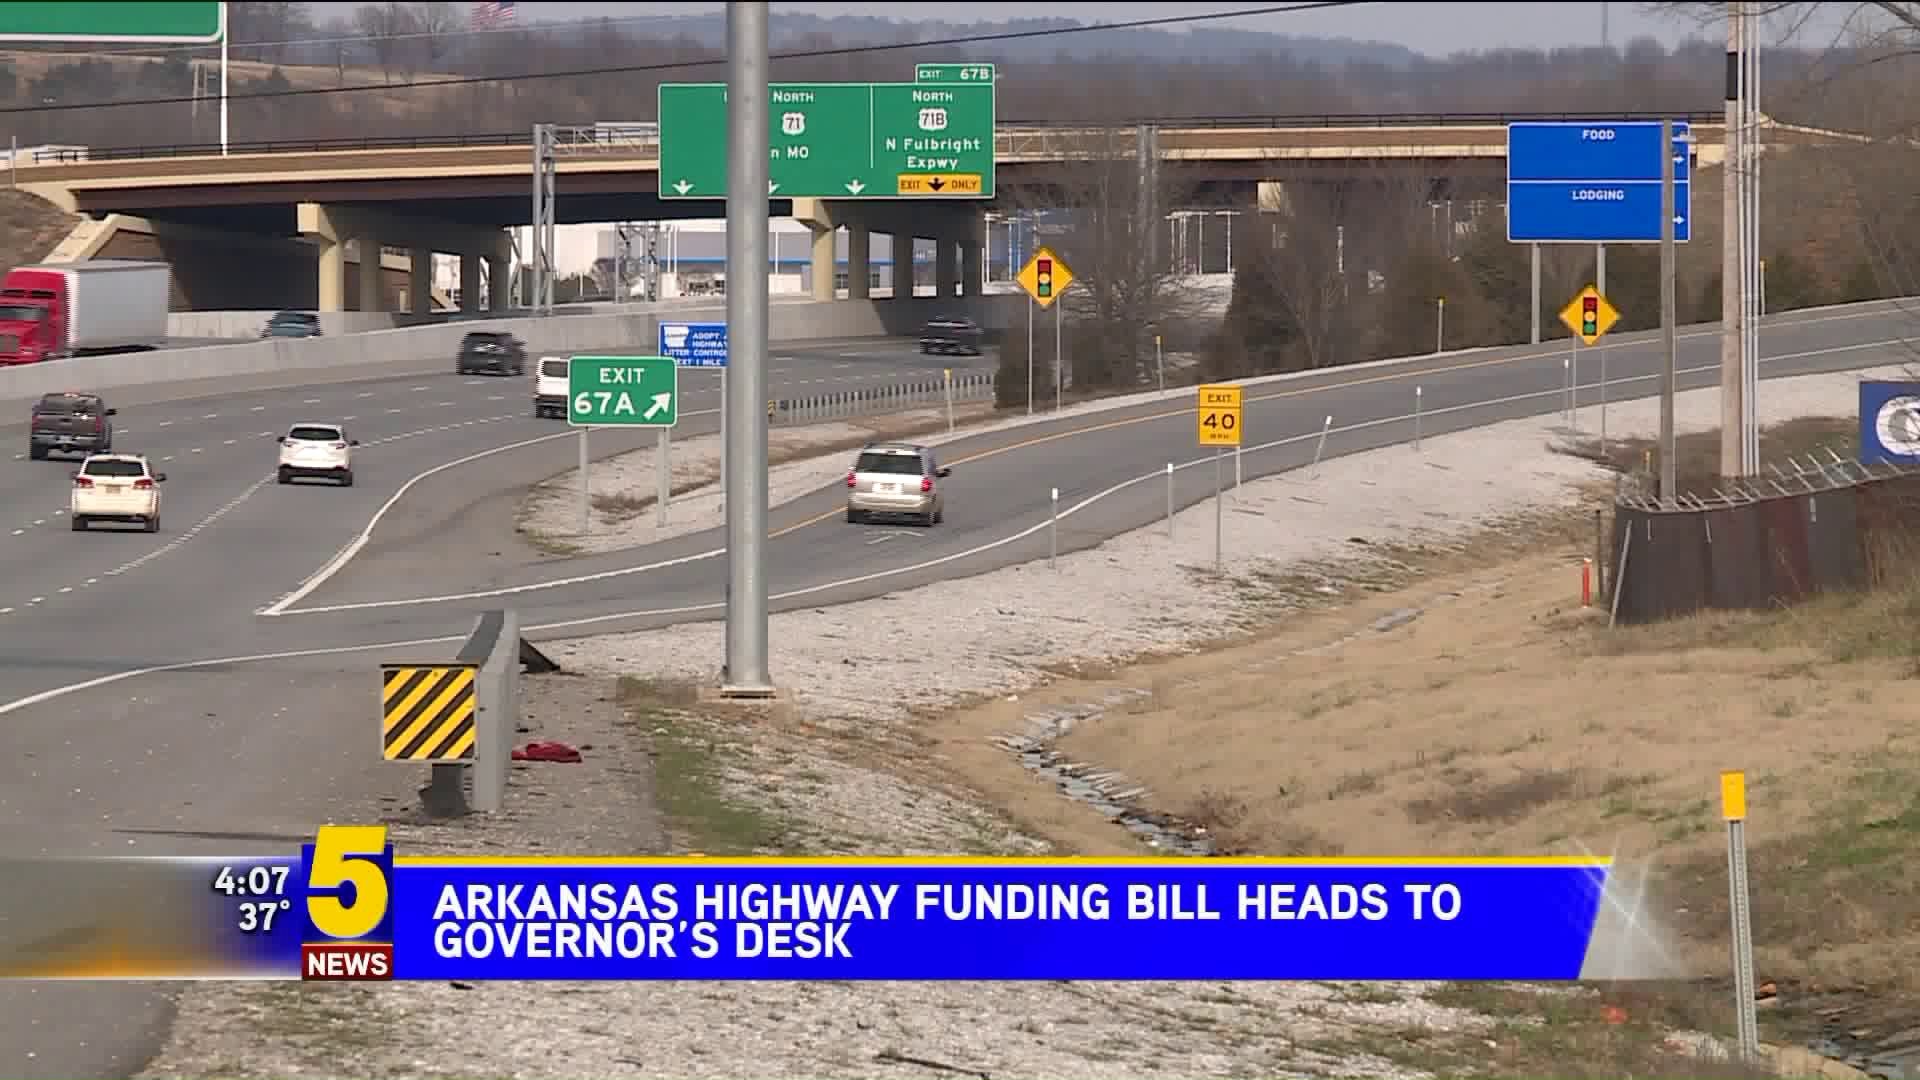 AR HWY Funding Bill Heads To Governors Desk